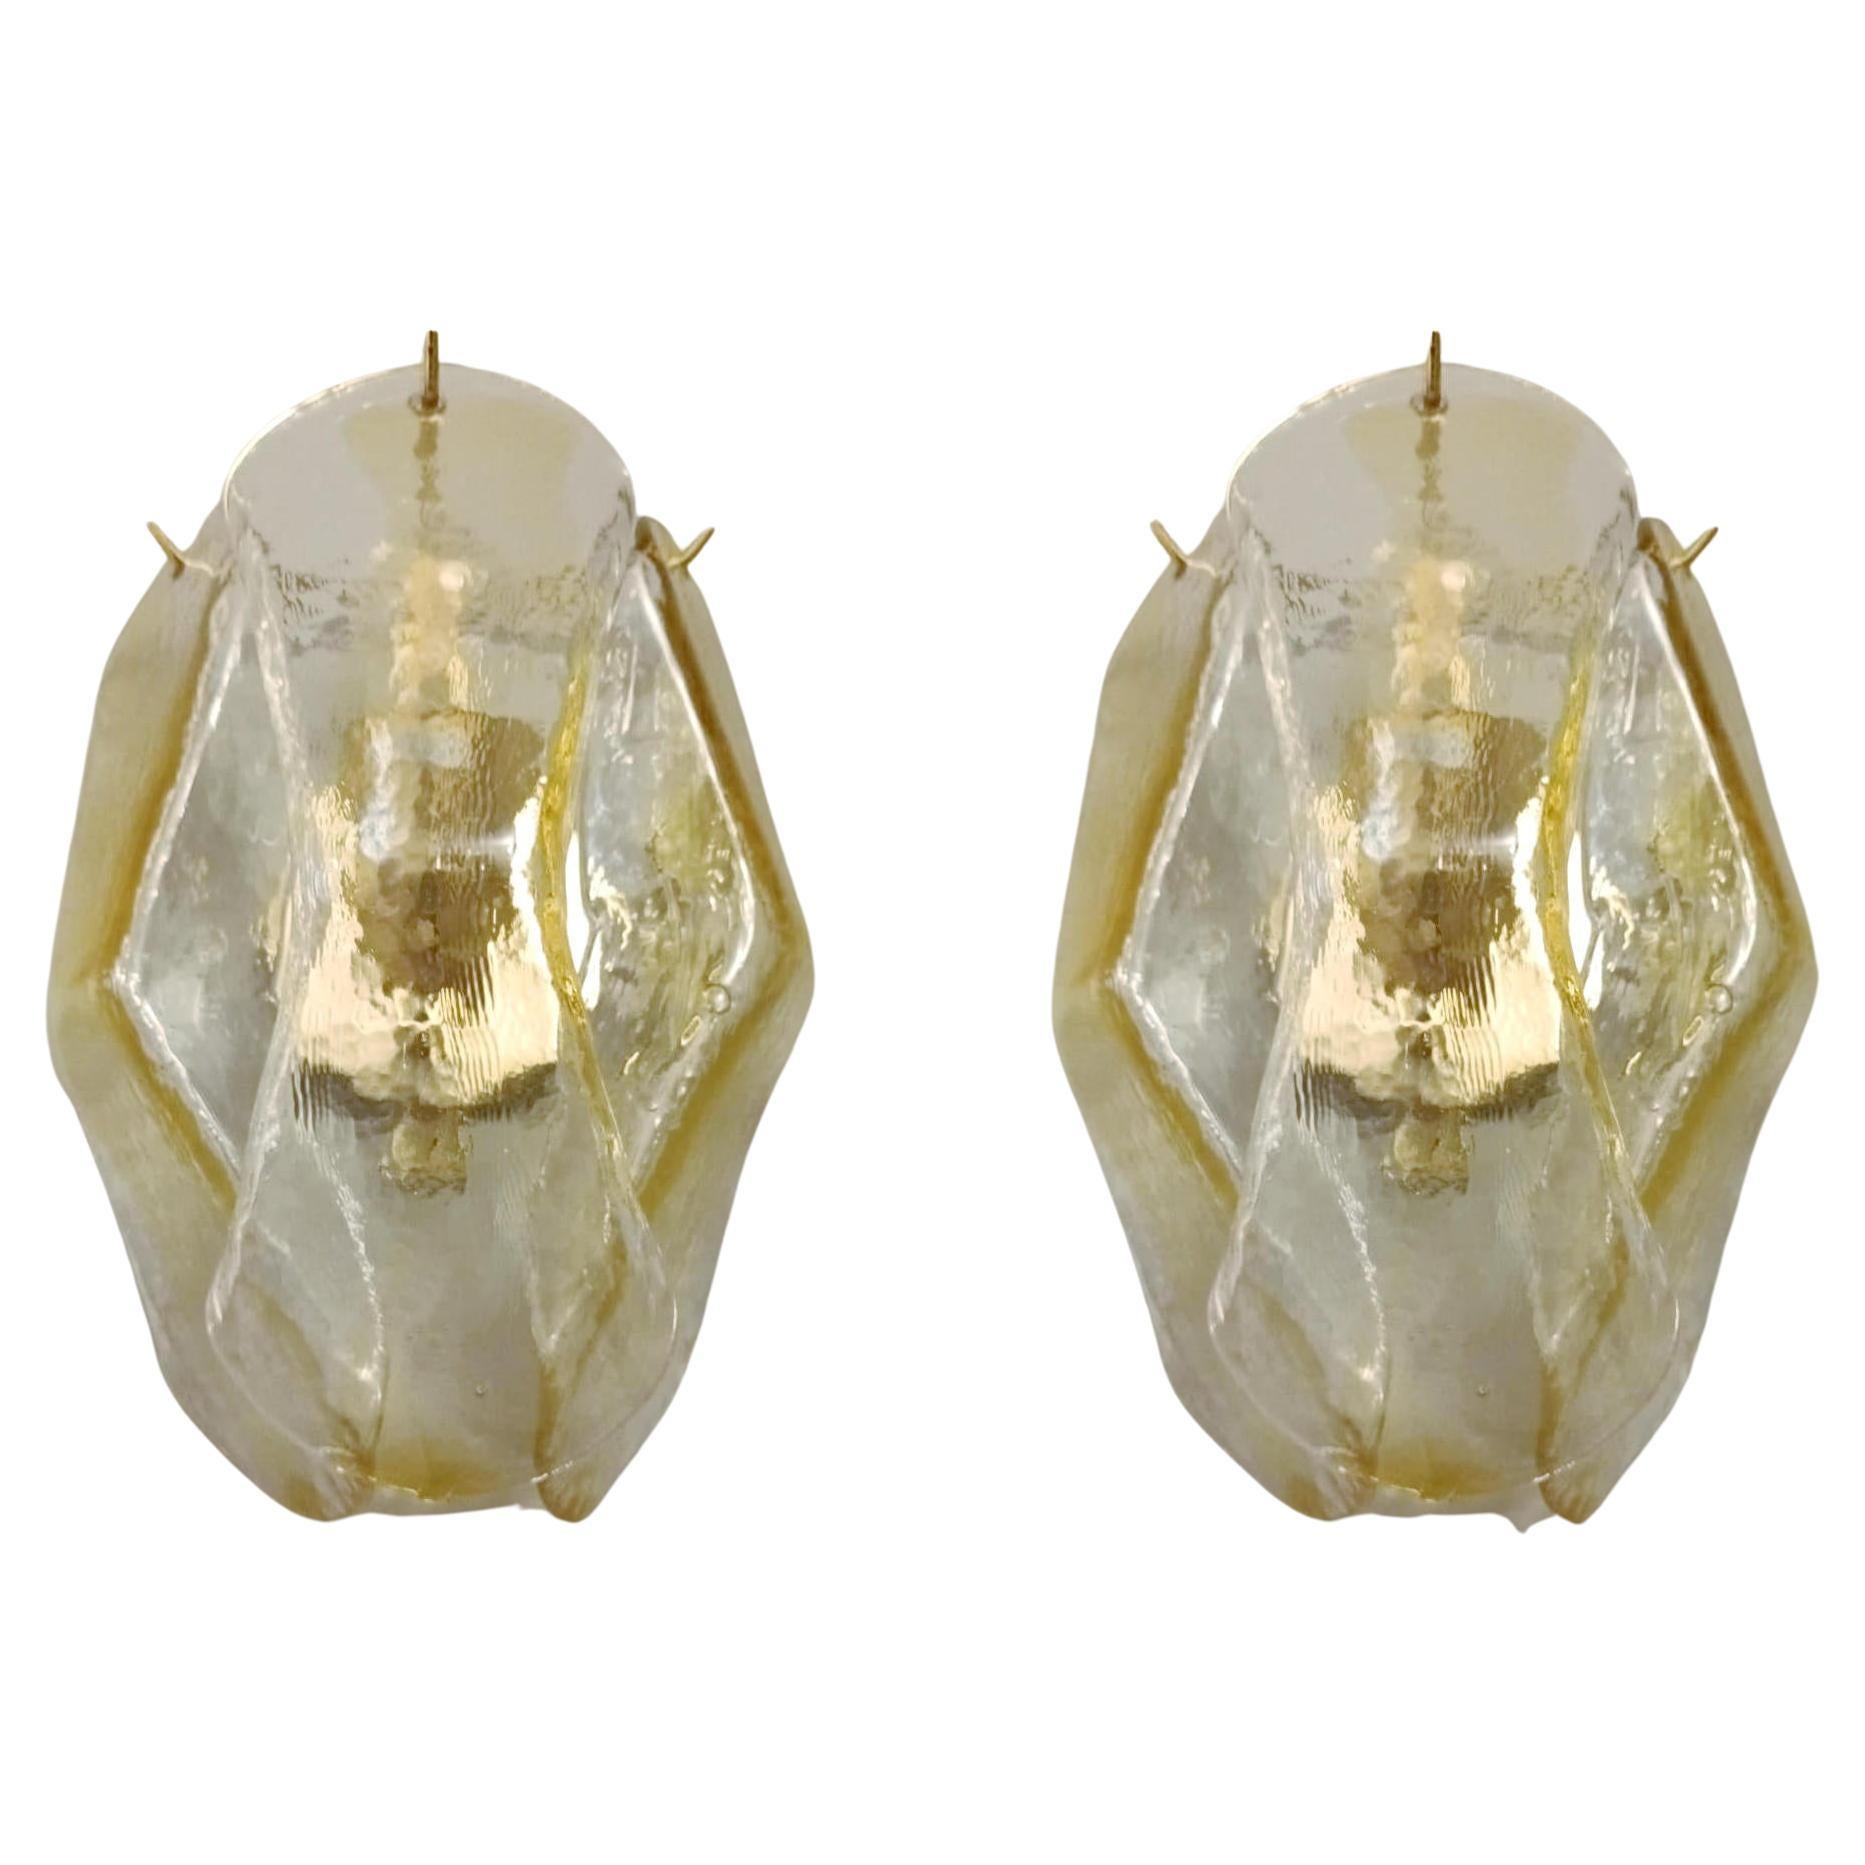 Pair of Geometric Sconces For Sale